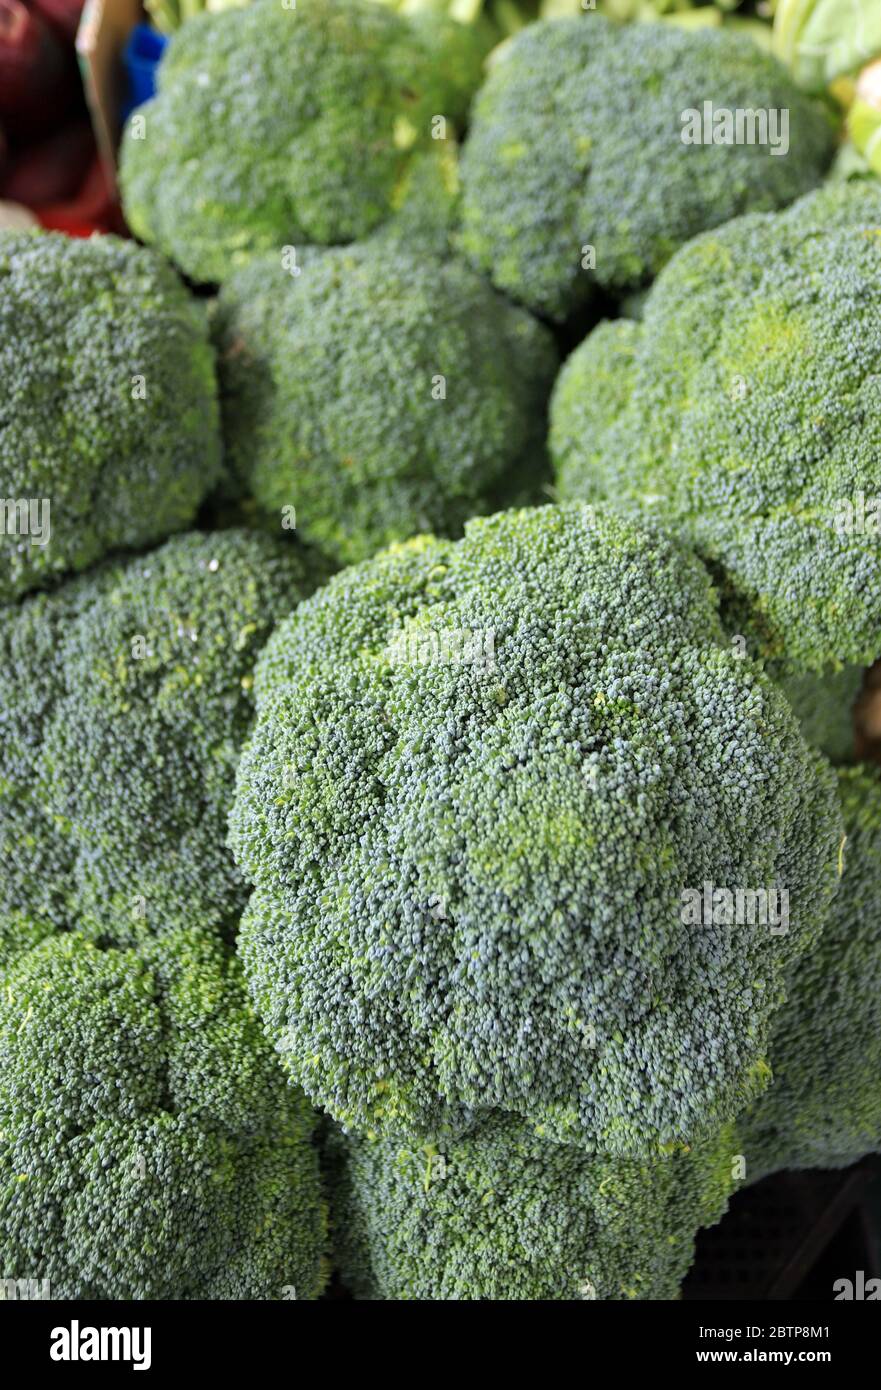 Close up of pile of broccoli. Broccoli vegetable texture. Stock Photo